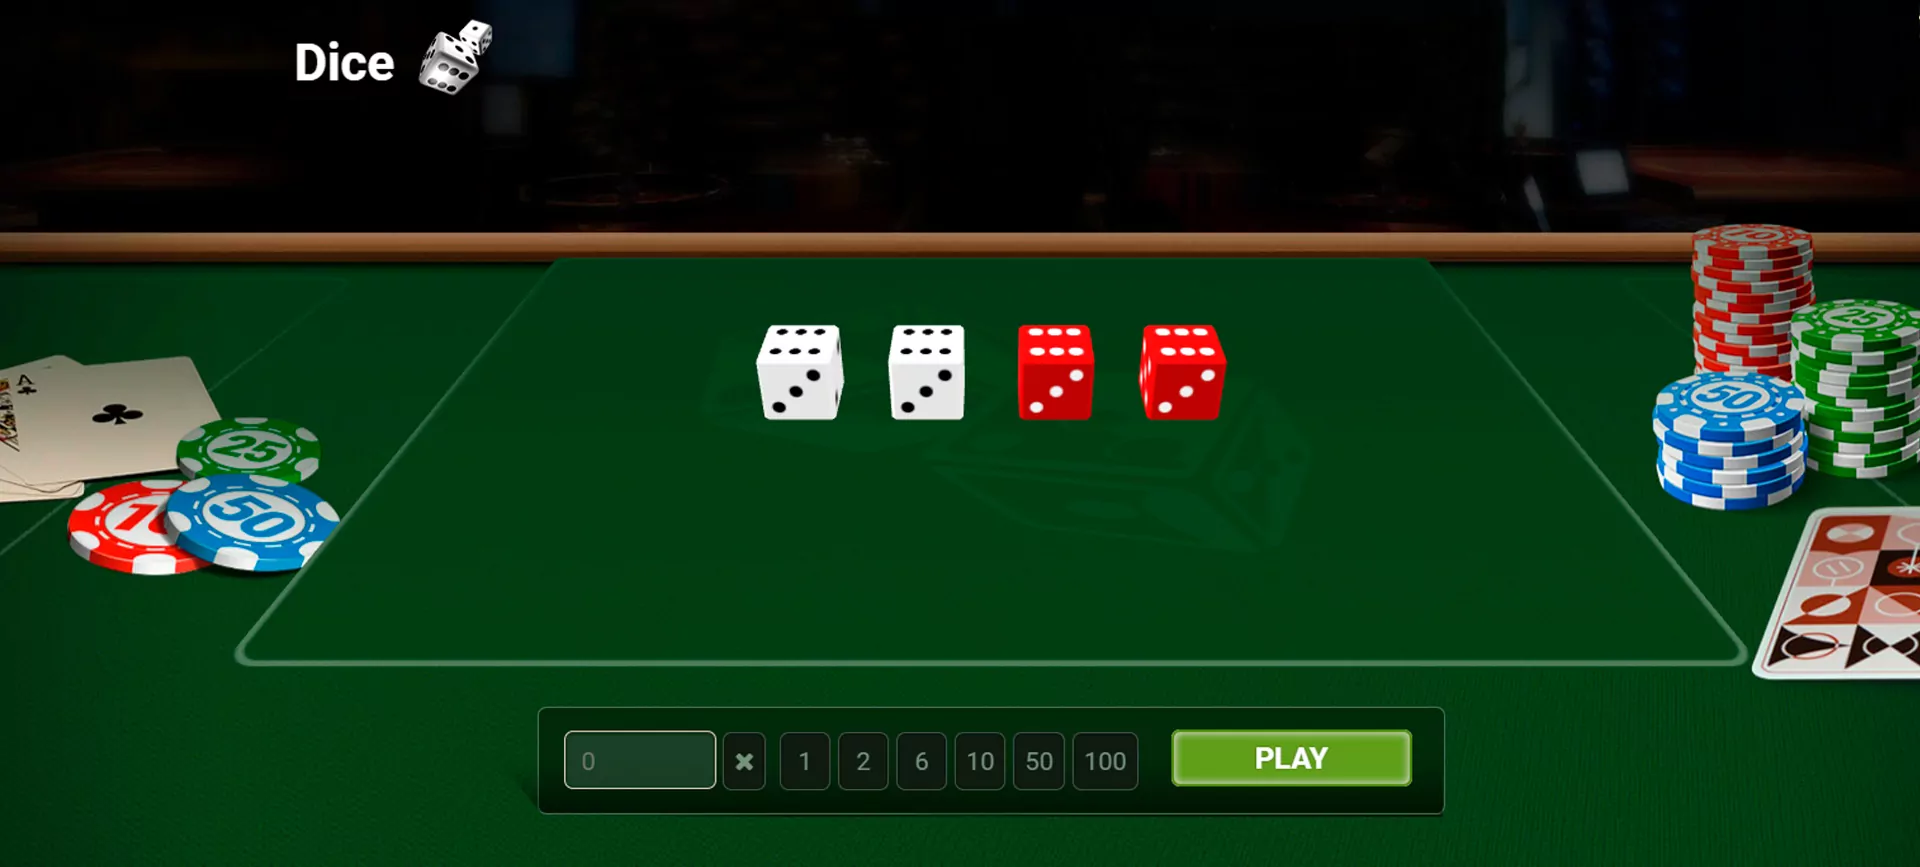 Play online in the Dice game.